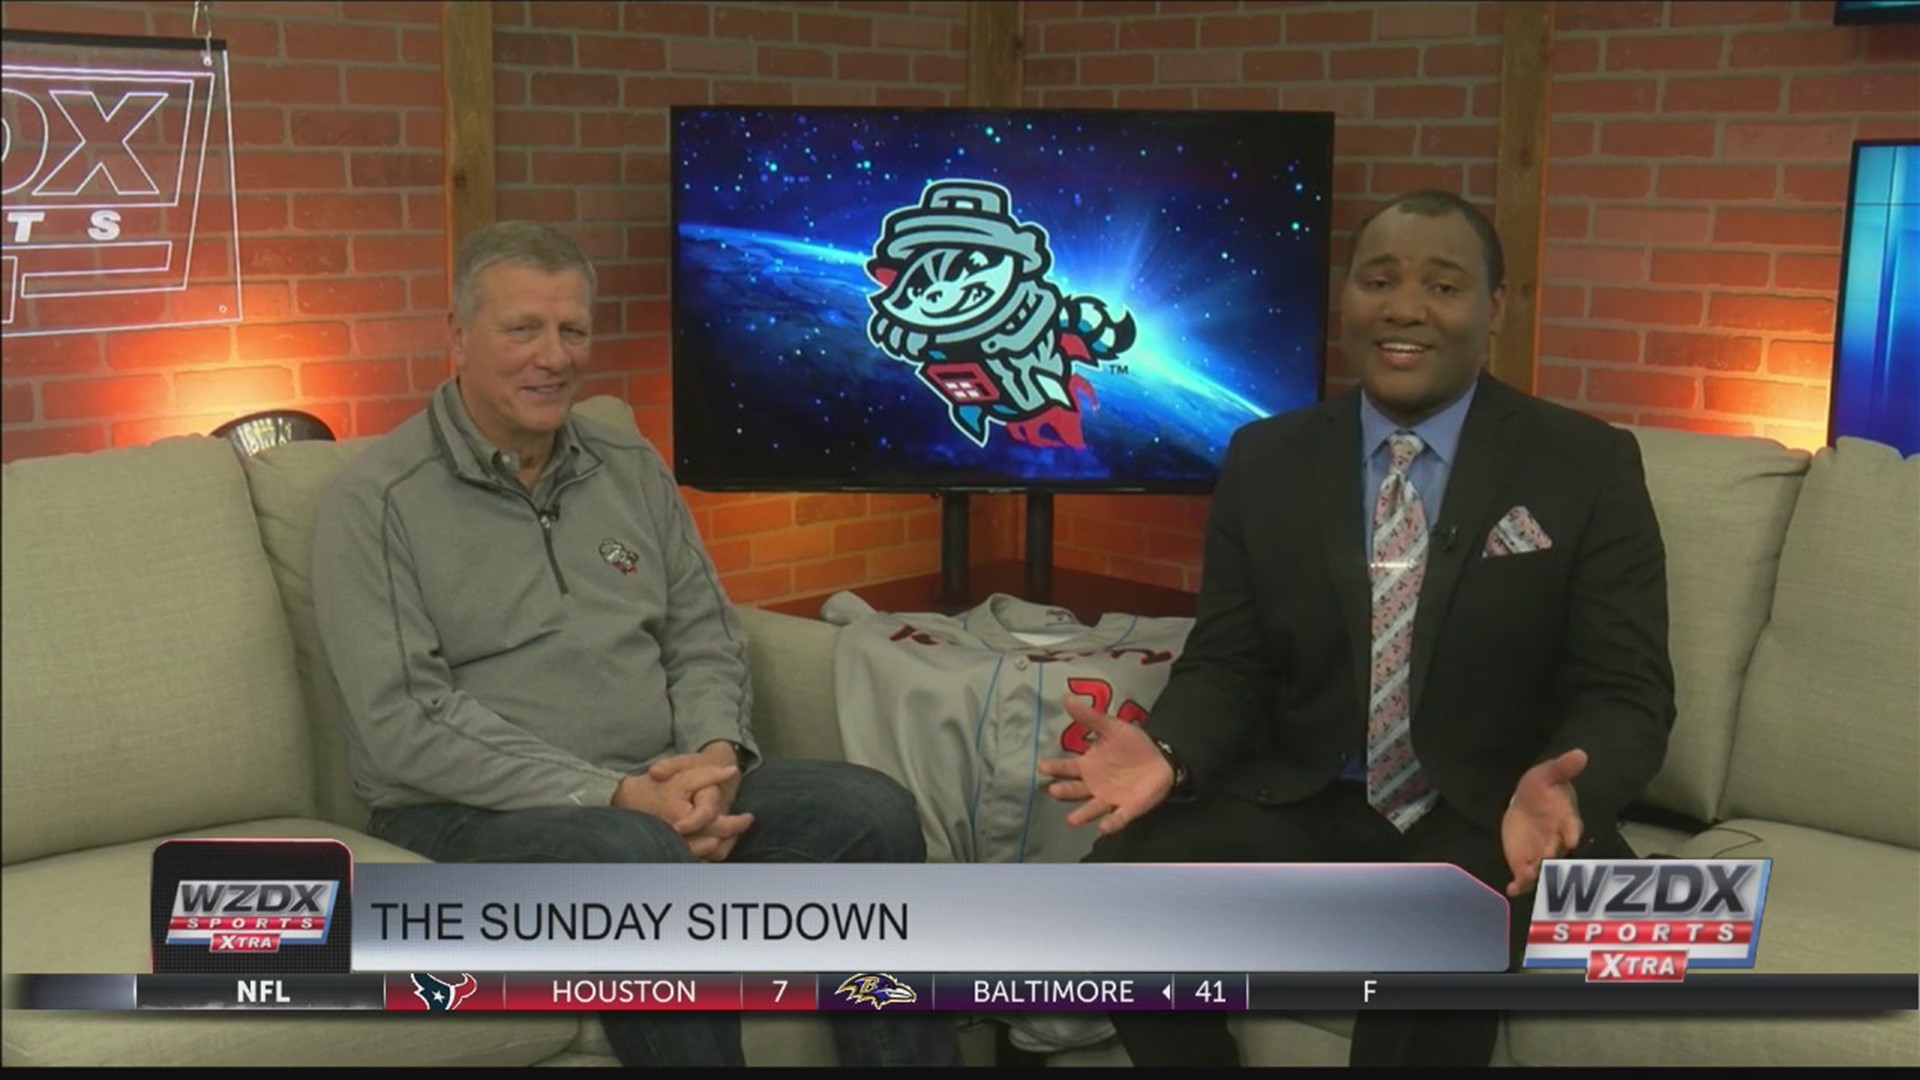 Ralph Nelson, the CEO of the Rocket City Trash Pandas, stopped by the studio and recorded a Sunday Sitdown with Mo Carter. He spoke about the mascot reveal which takes place Friday and about the upcoming season in general